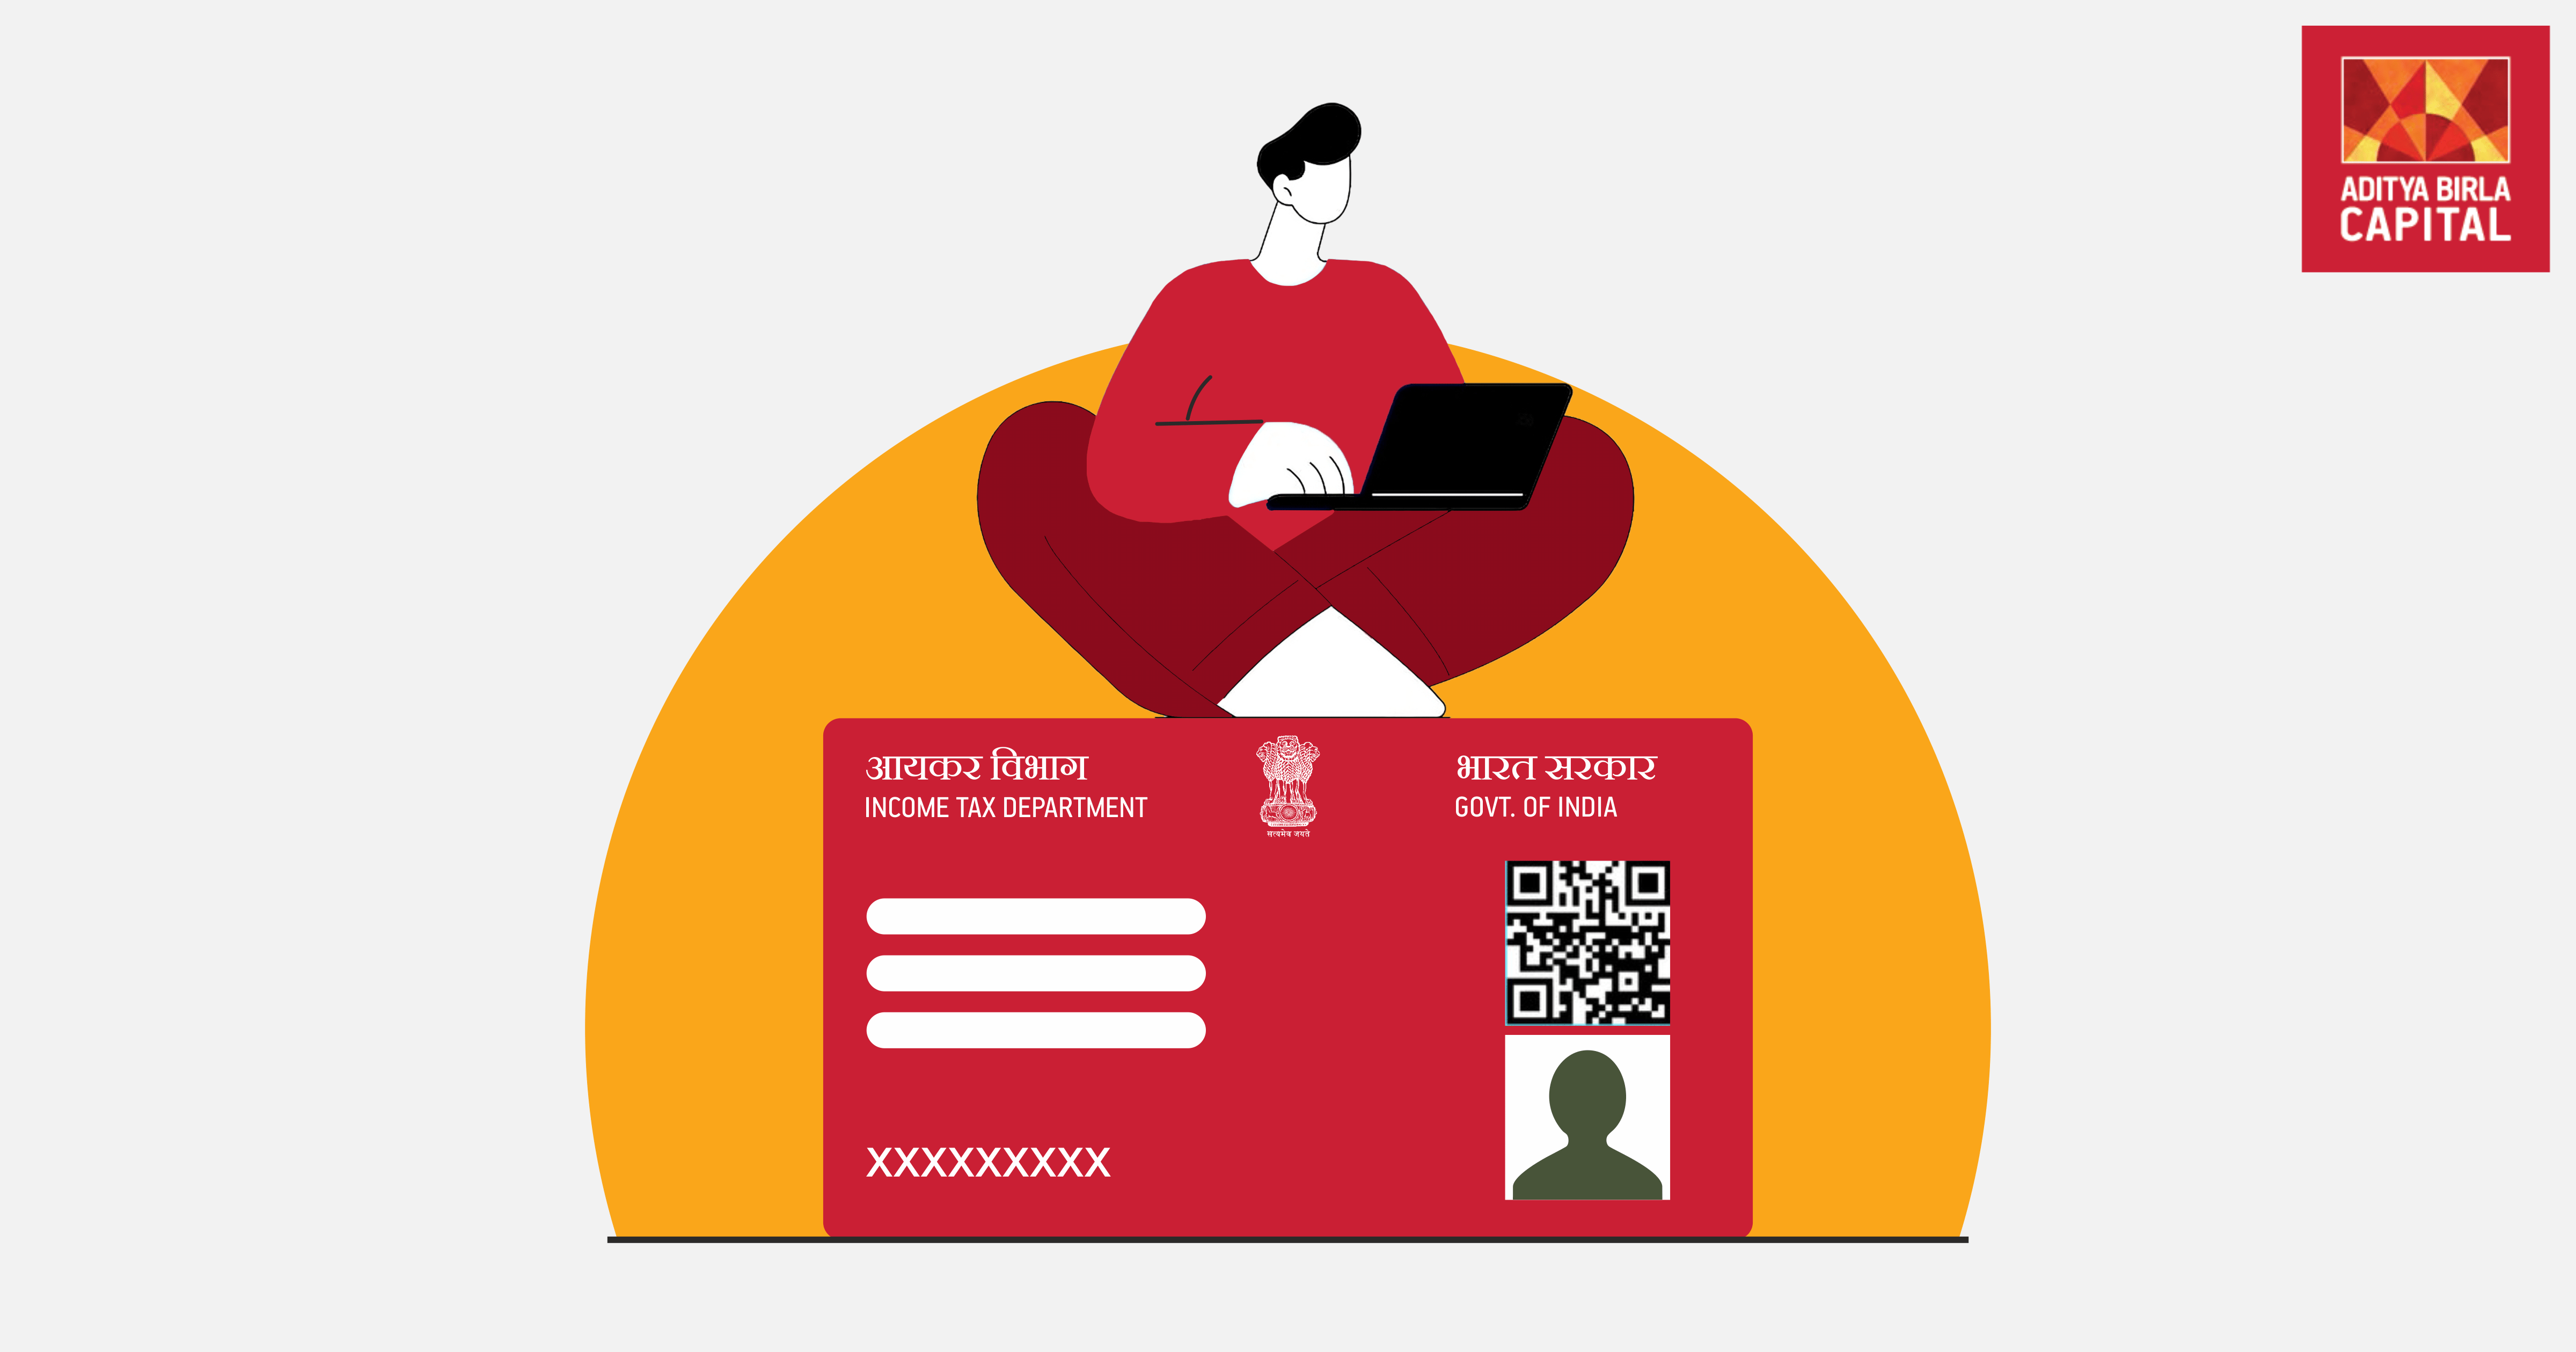 A Step-by-Step Guide to Apply for a PAN Card Online